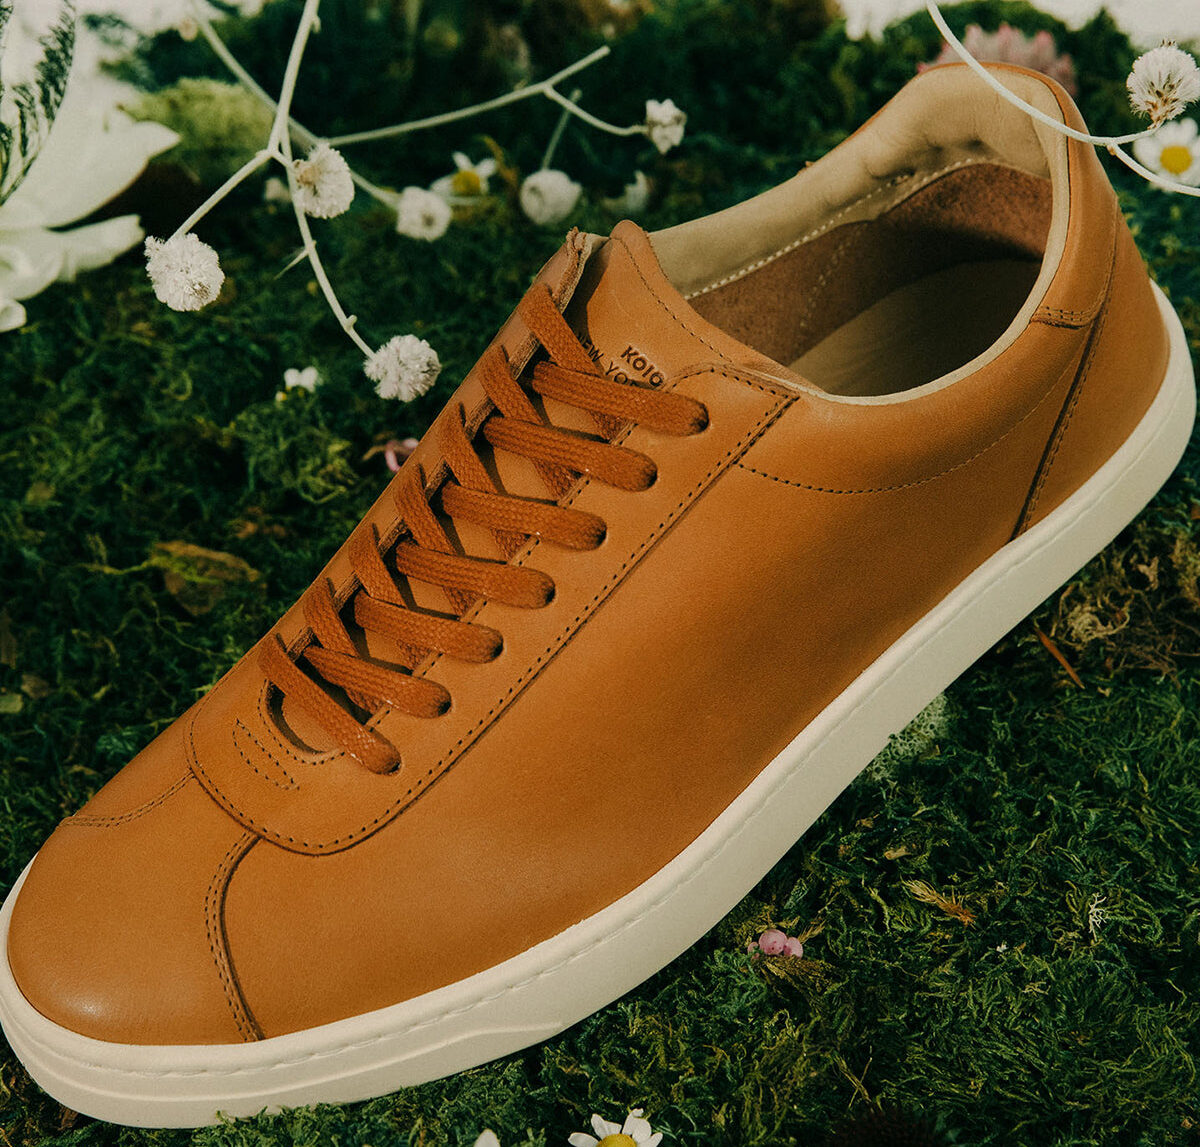 US Emerging Brand Koio Achieves a Milestone in the Footwear Industry With 99% Biodegradable Sneakers